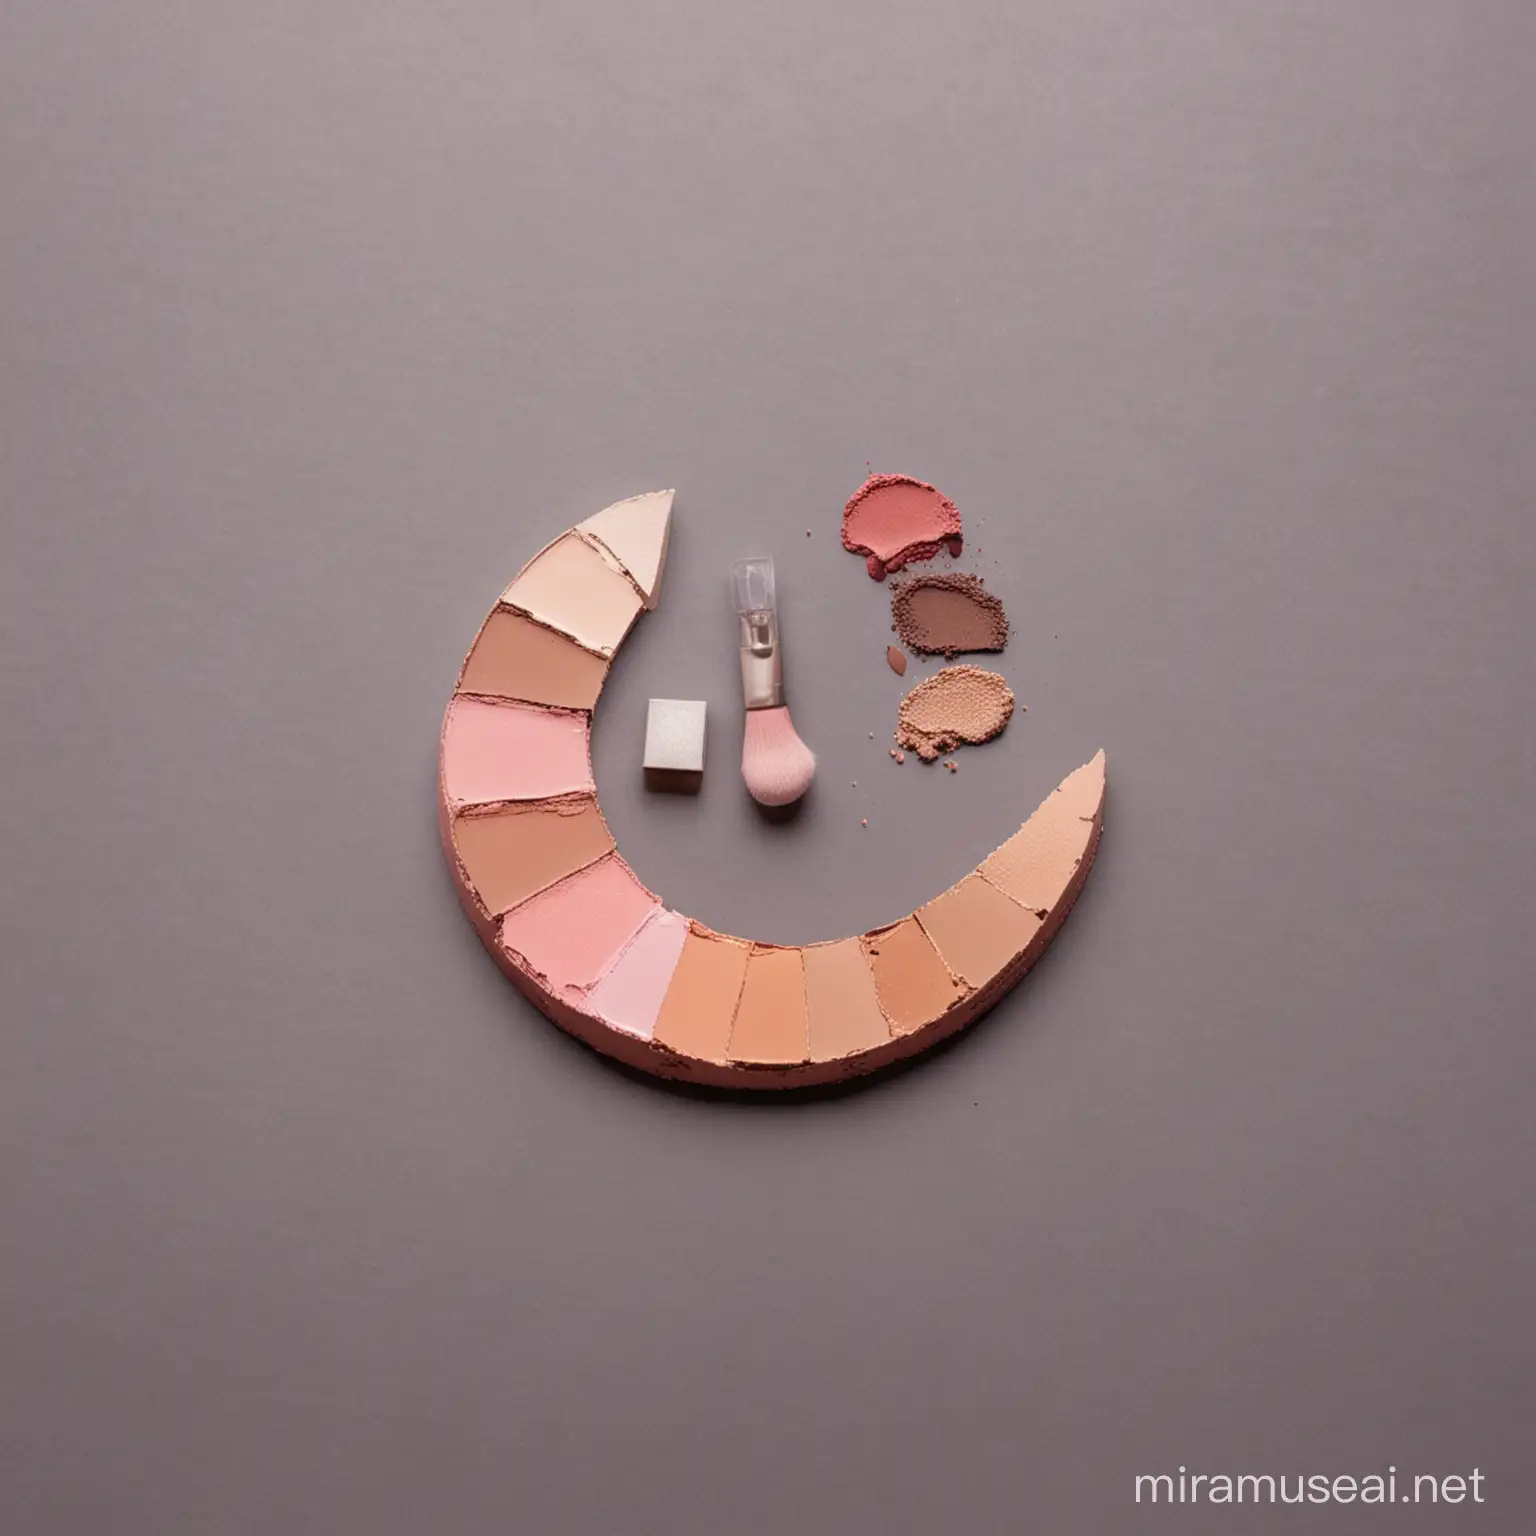 makeup productus arranged in the shape of half moon